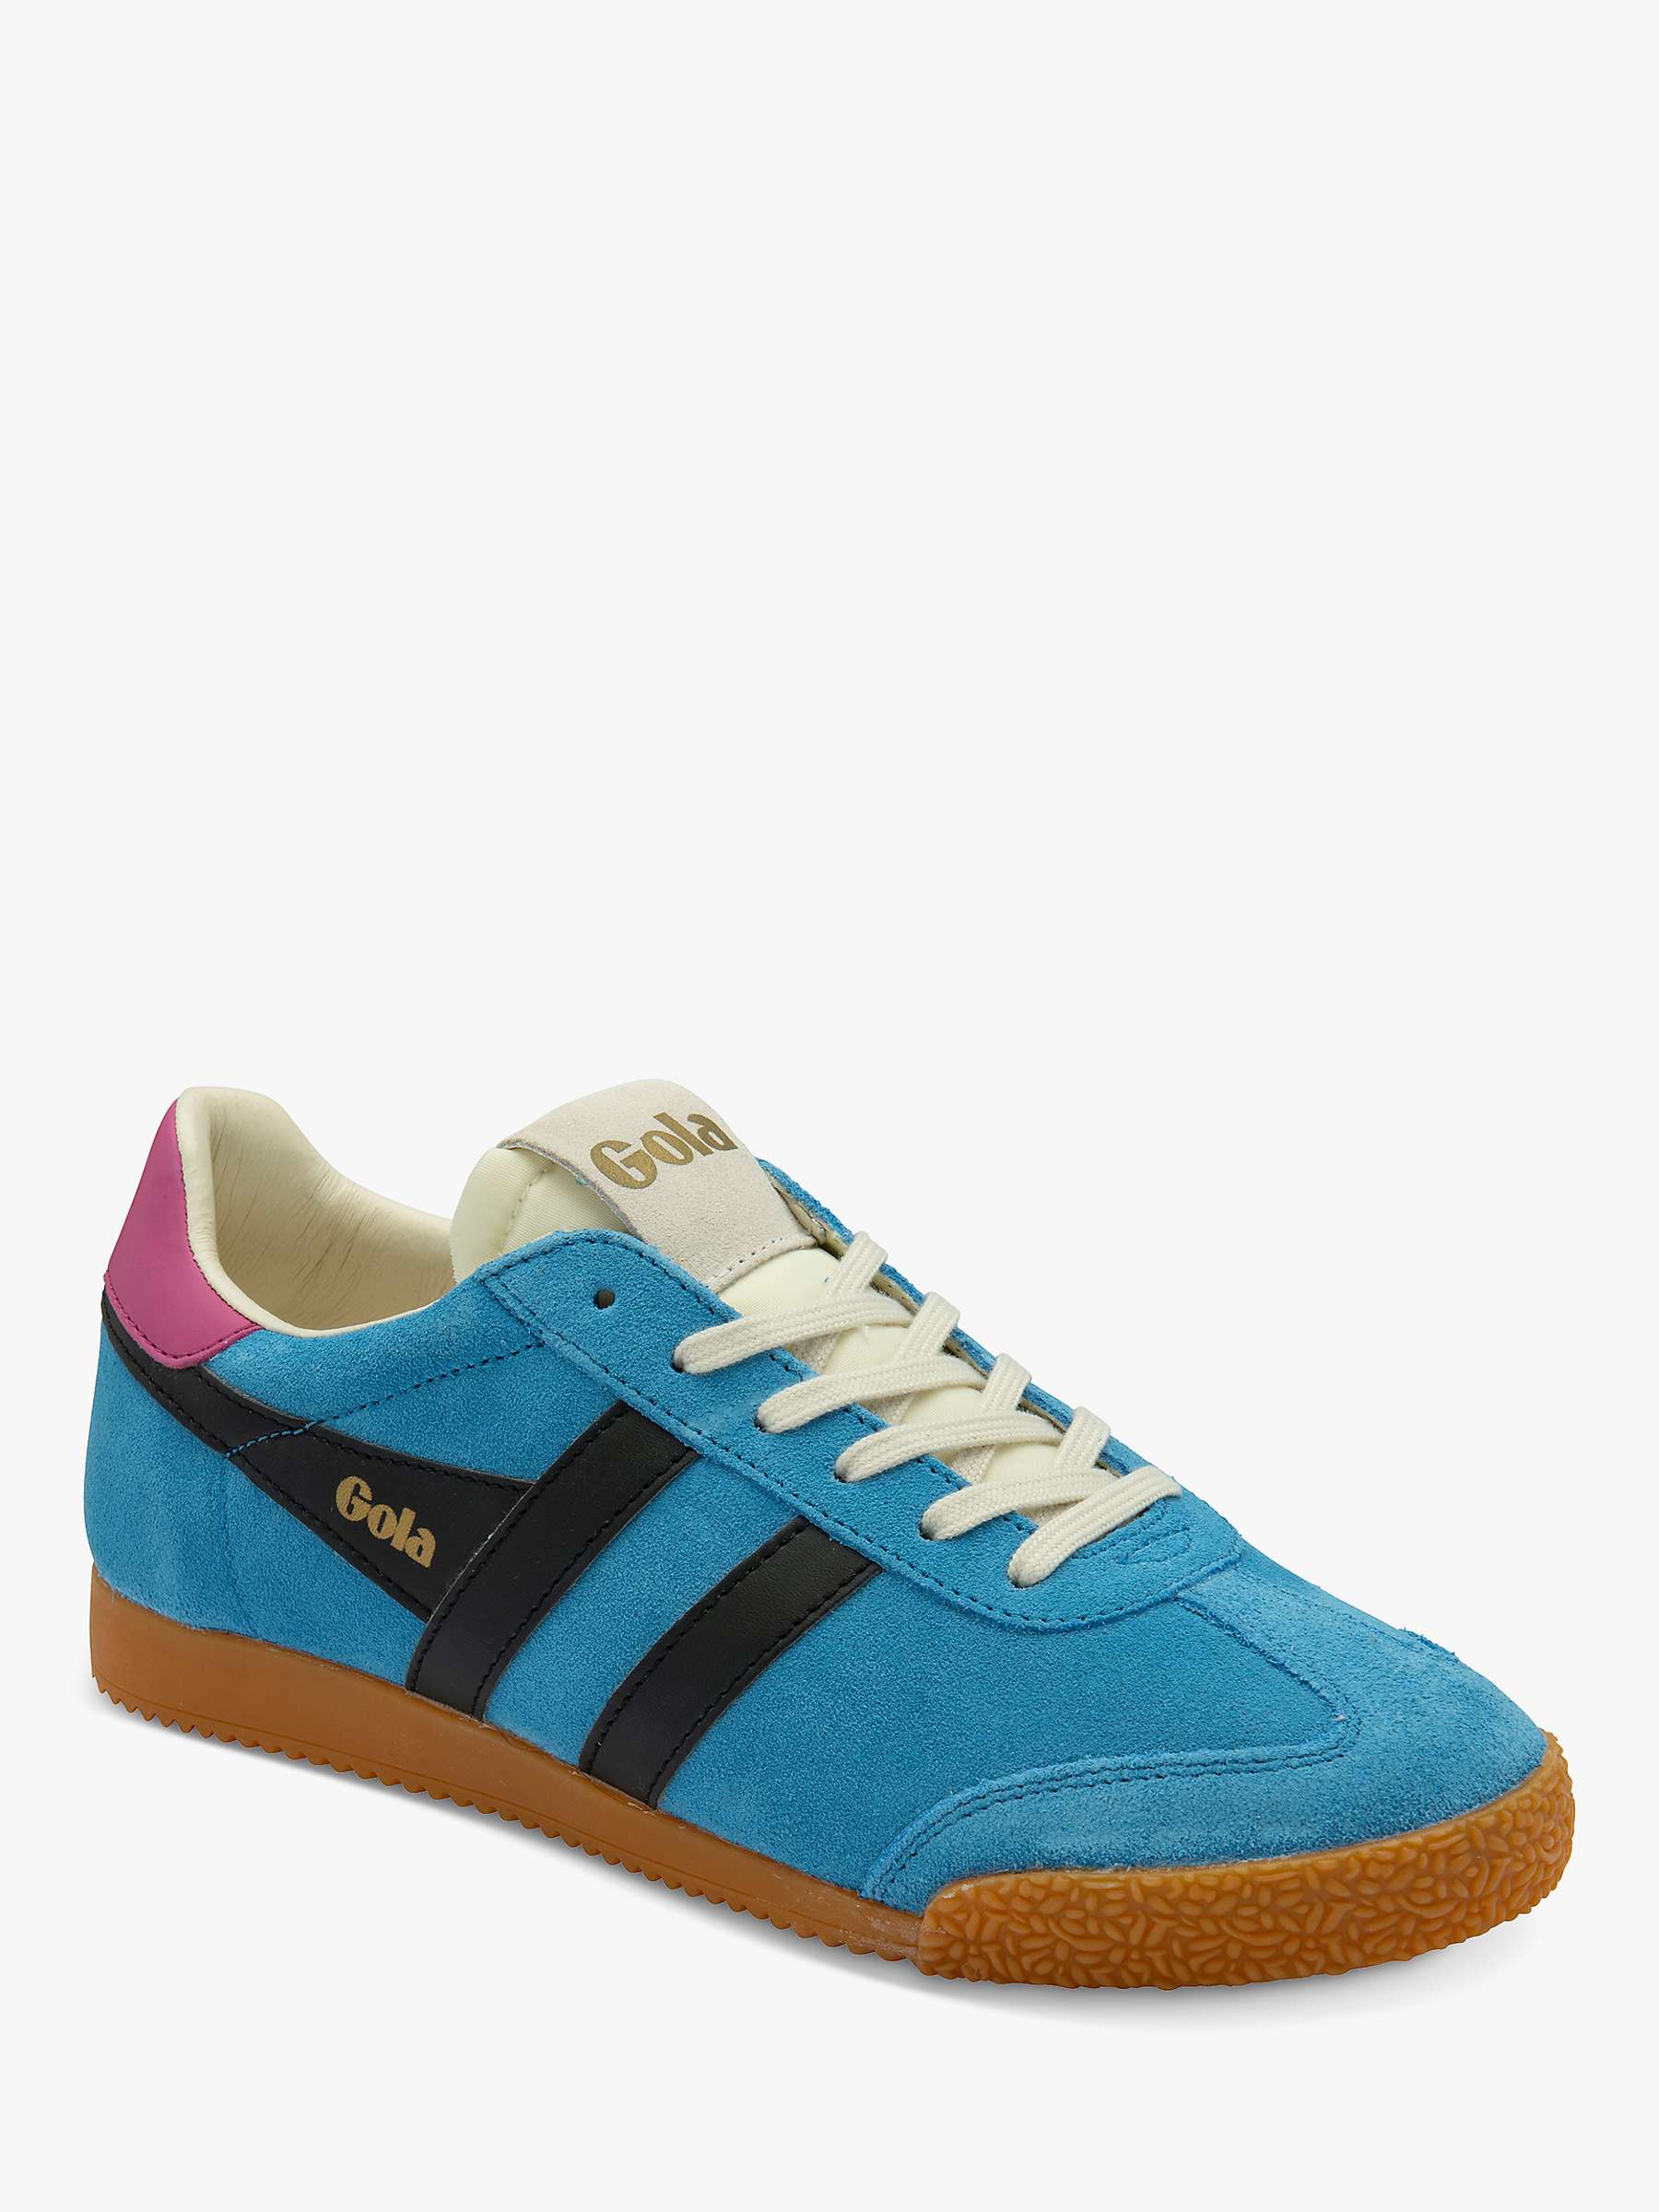 Buy Gola Classics Elan Suede Lace Up Trainers Online at johnlewis.com